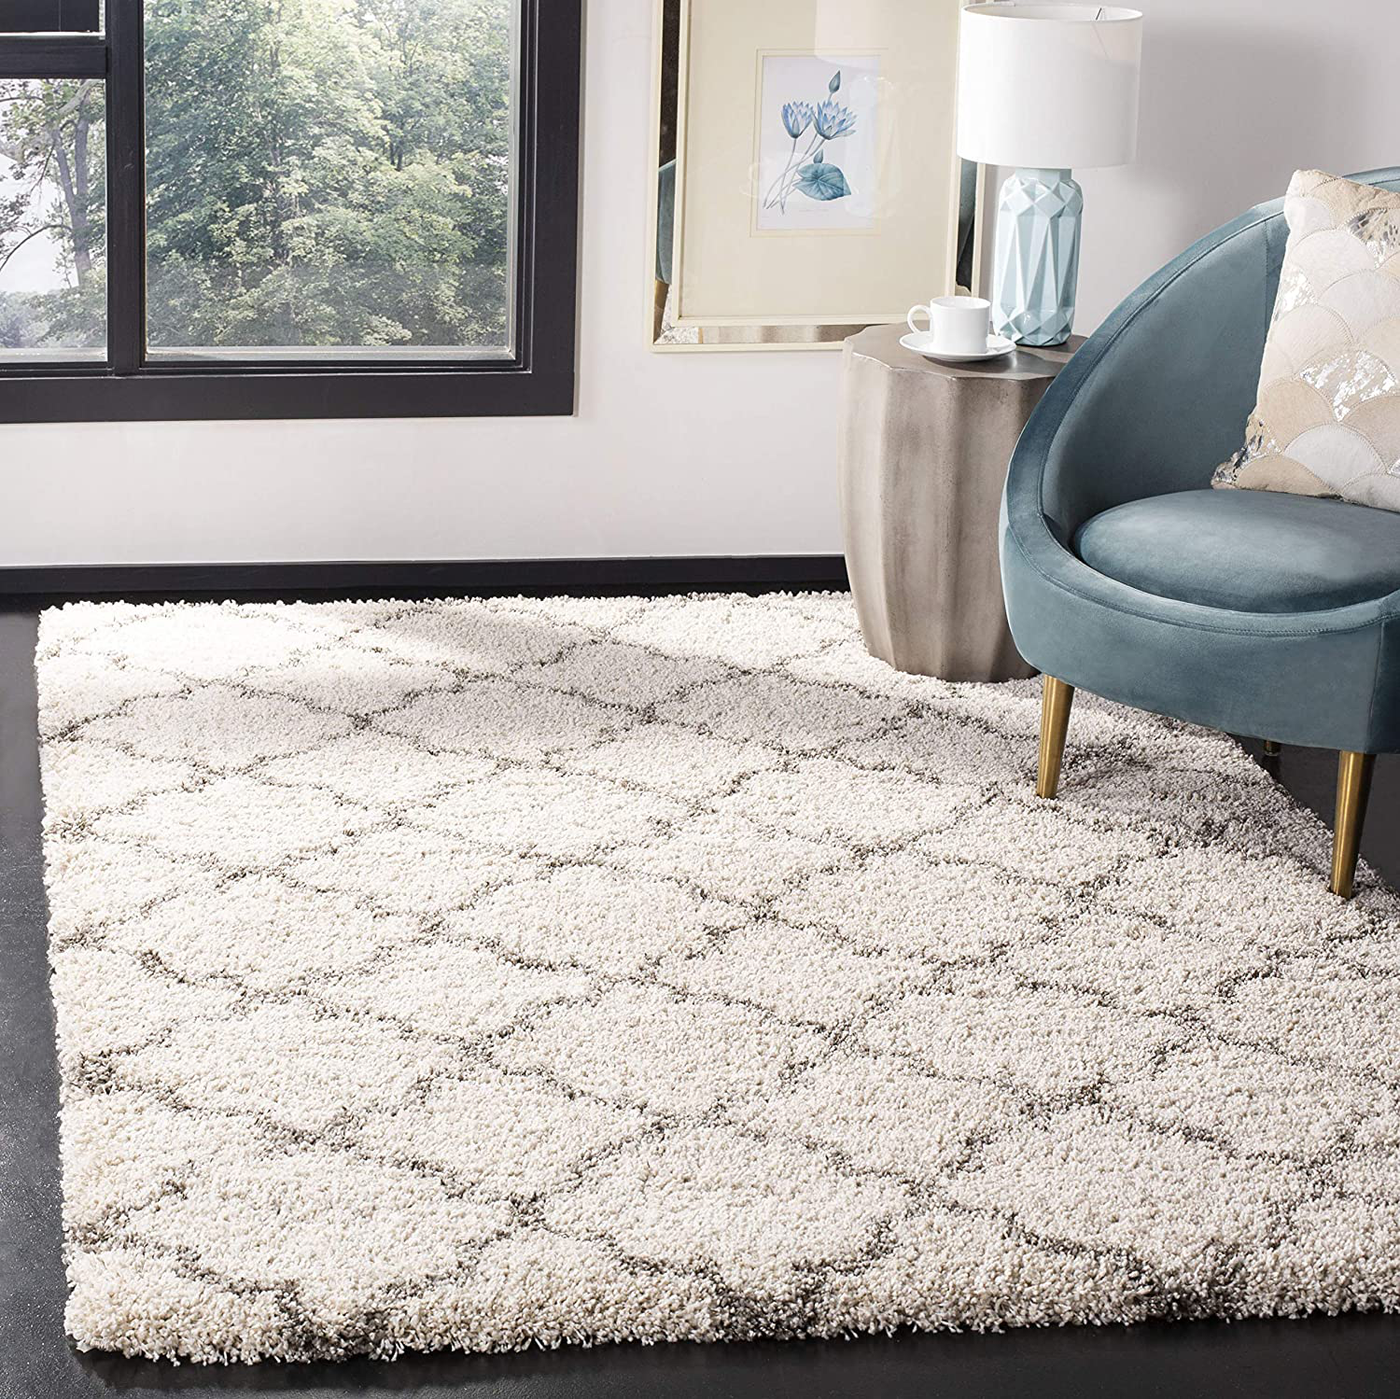 SAFAVIEH Hudson Shag Collection SGH282A Moroccan Trellis Non-Shedding Living Room Bedroom Dining Room Entryway Plush 2-inch Thick Runner, 2'3" x 6' , Ivory / Grey